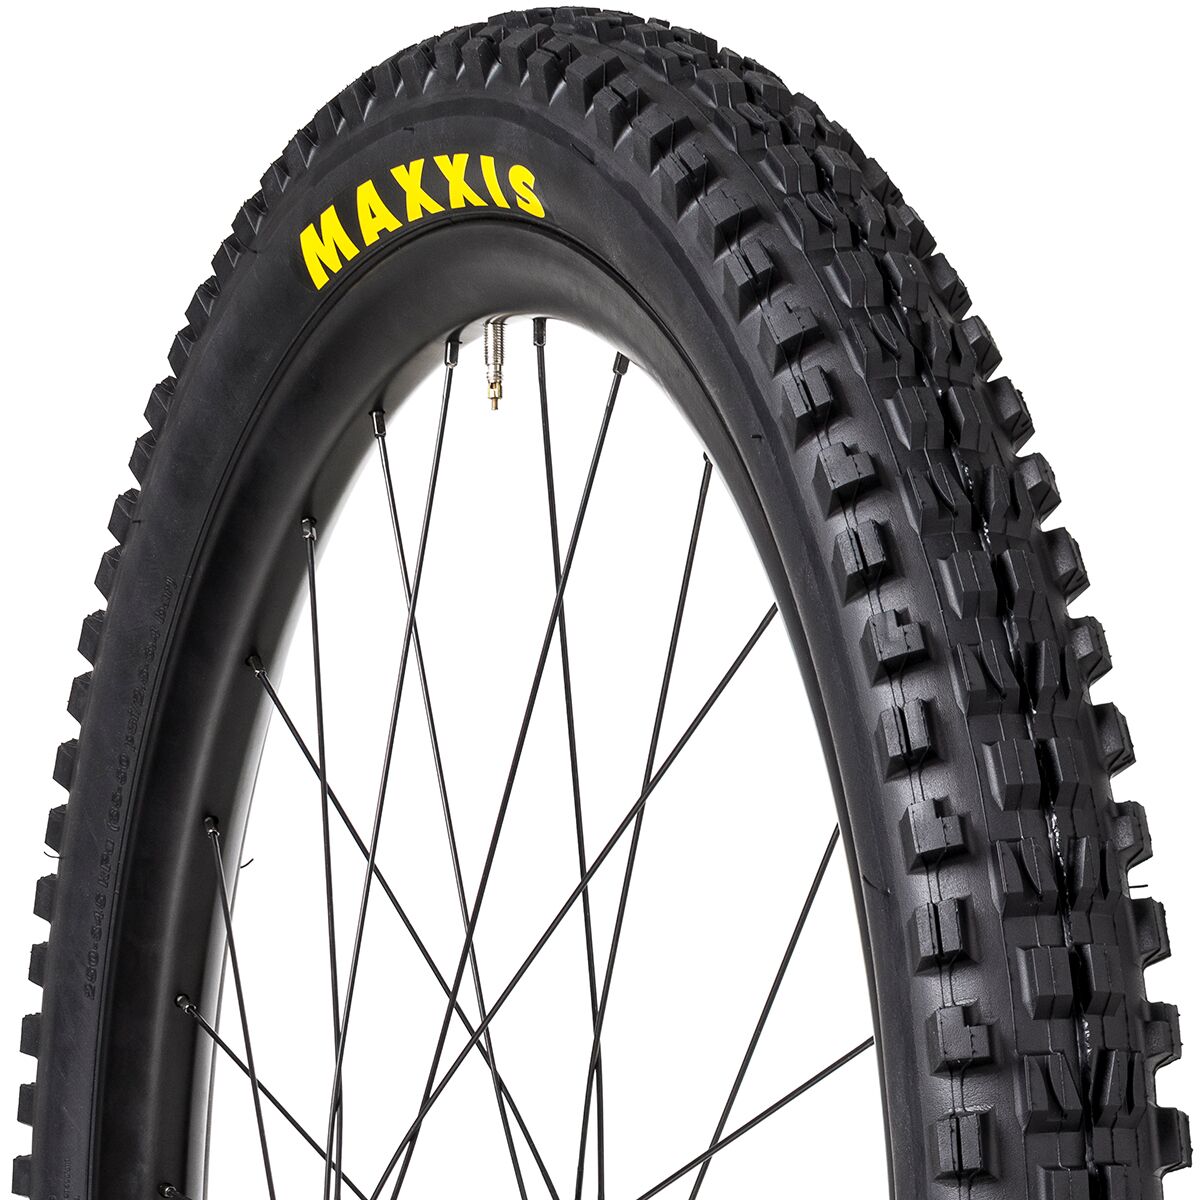 Maxxis Minion DHF Wide Trail 3C/Double Down/TR 27.5in Tire